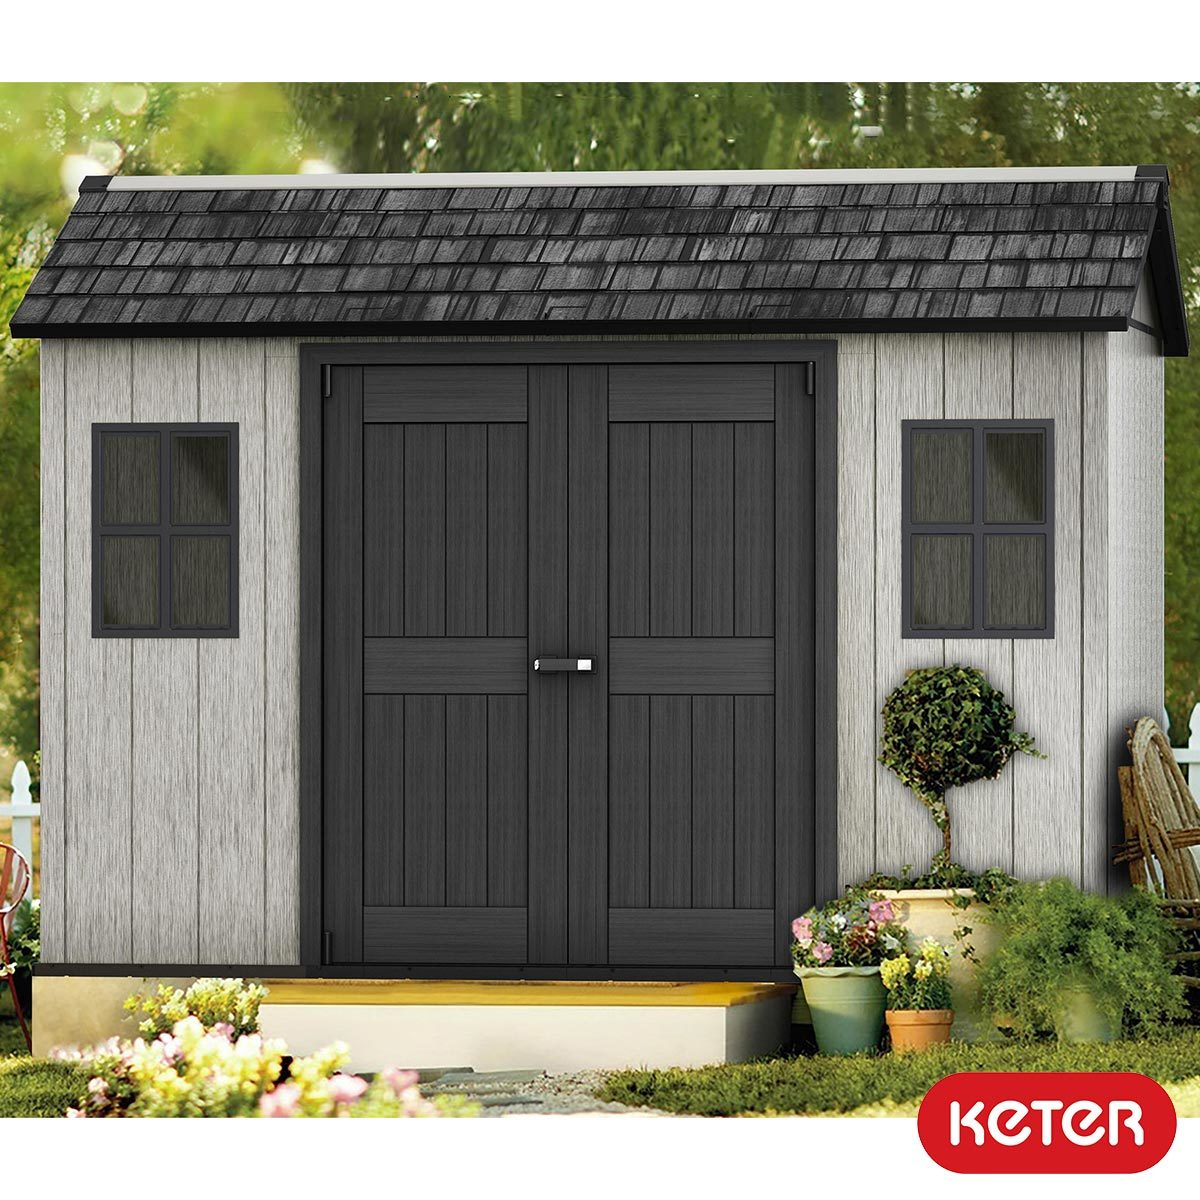 Keter Summerhouse Garden Shed 11ft X 7ft 6 3 4 X 2 3m Now